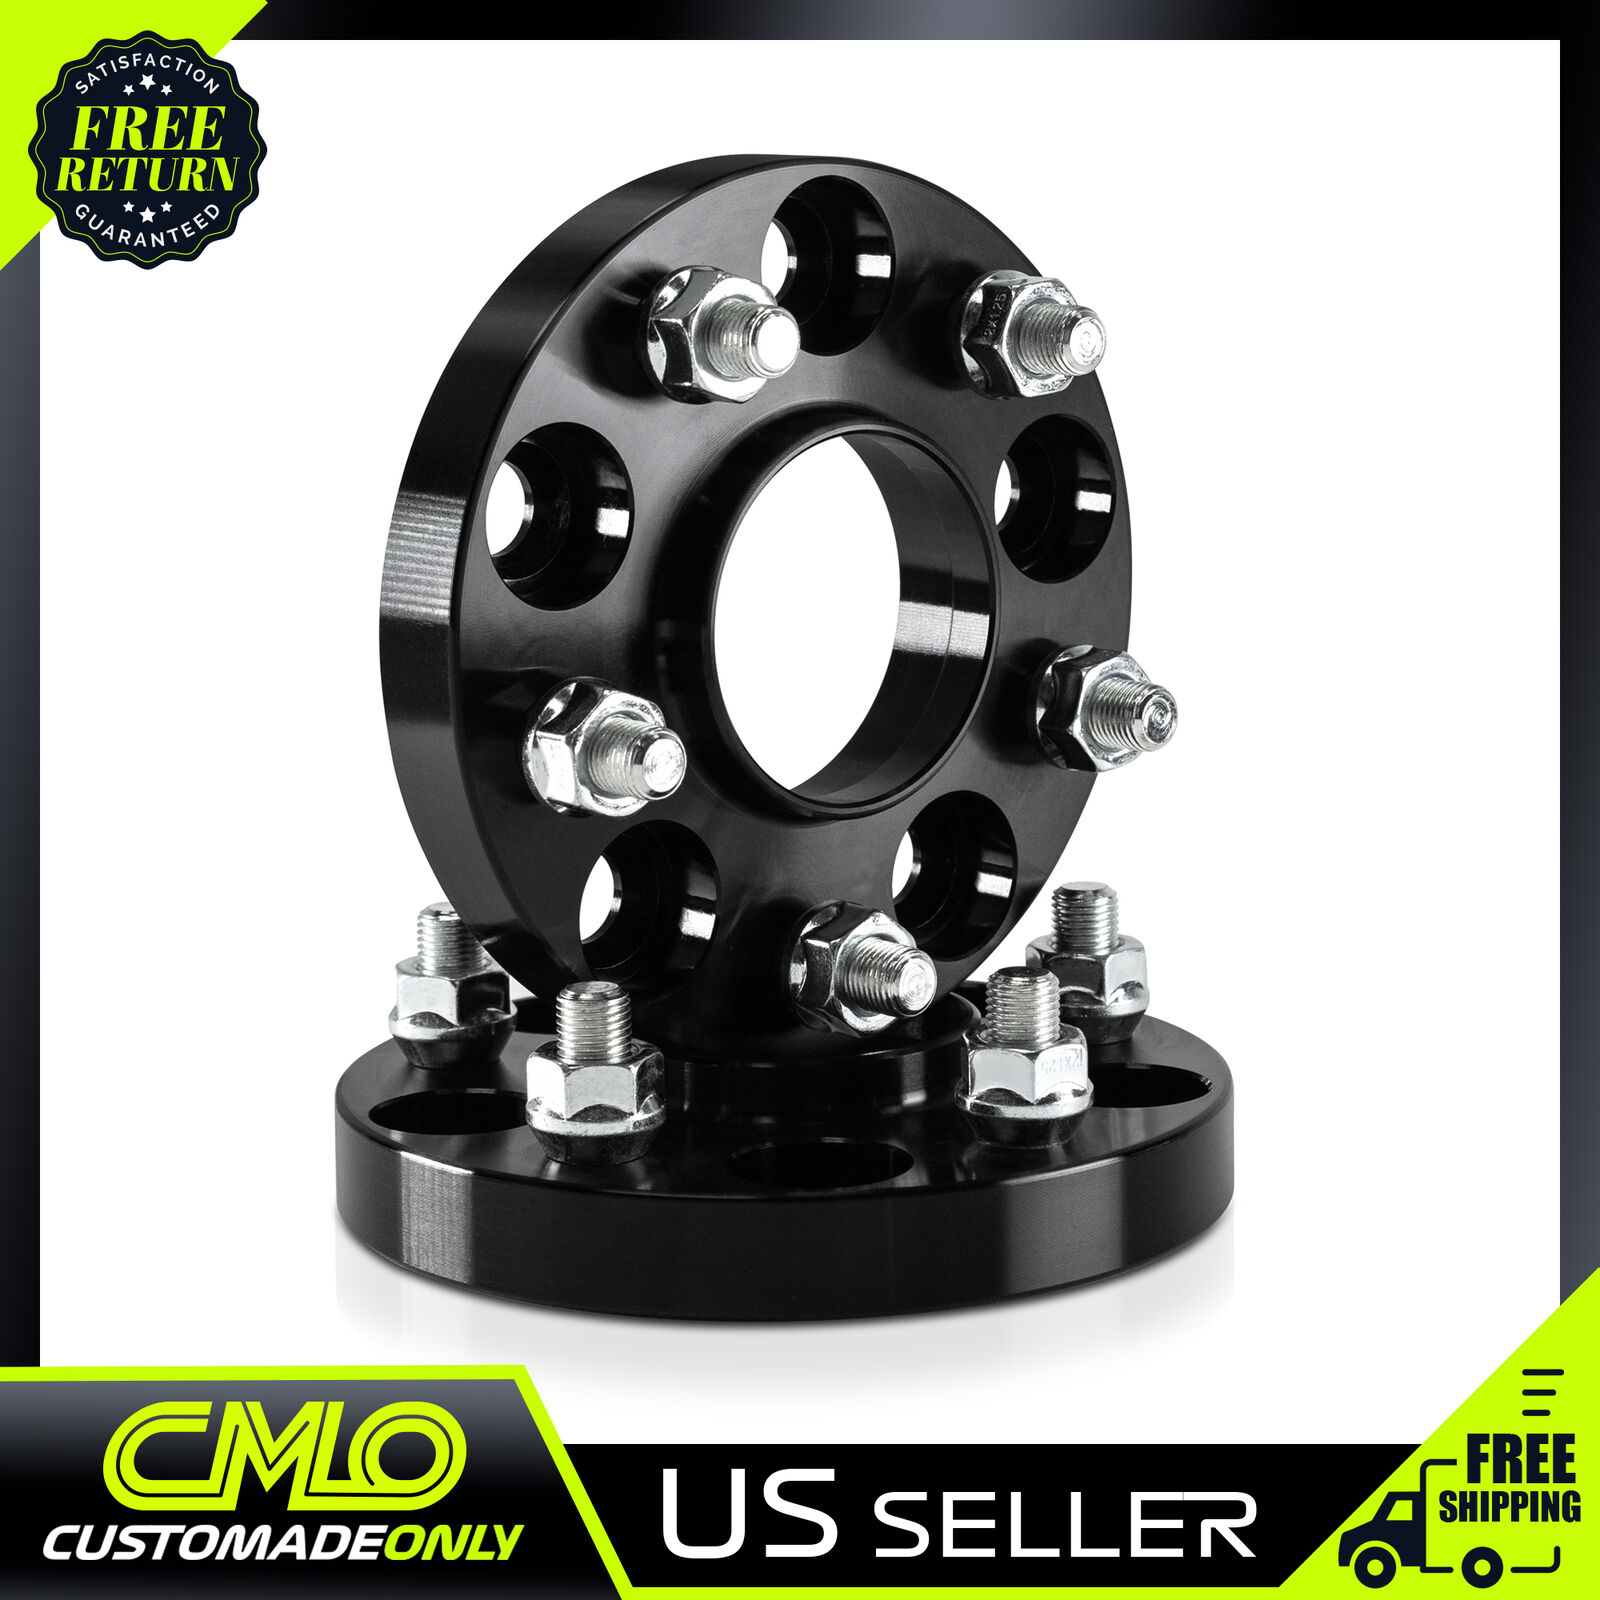 2pc 20mm Black Hubcentric Wheel Spacers 5x114.3 Fits Civic Accord S2000 RSX TSX